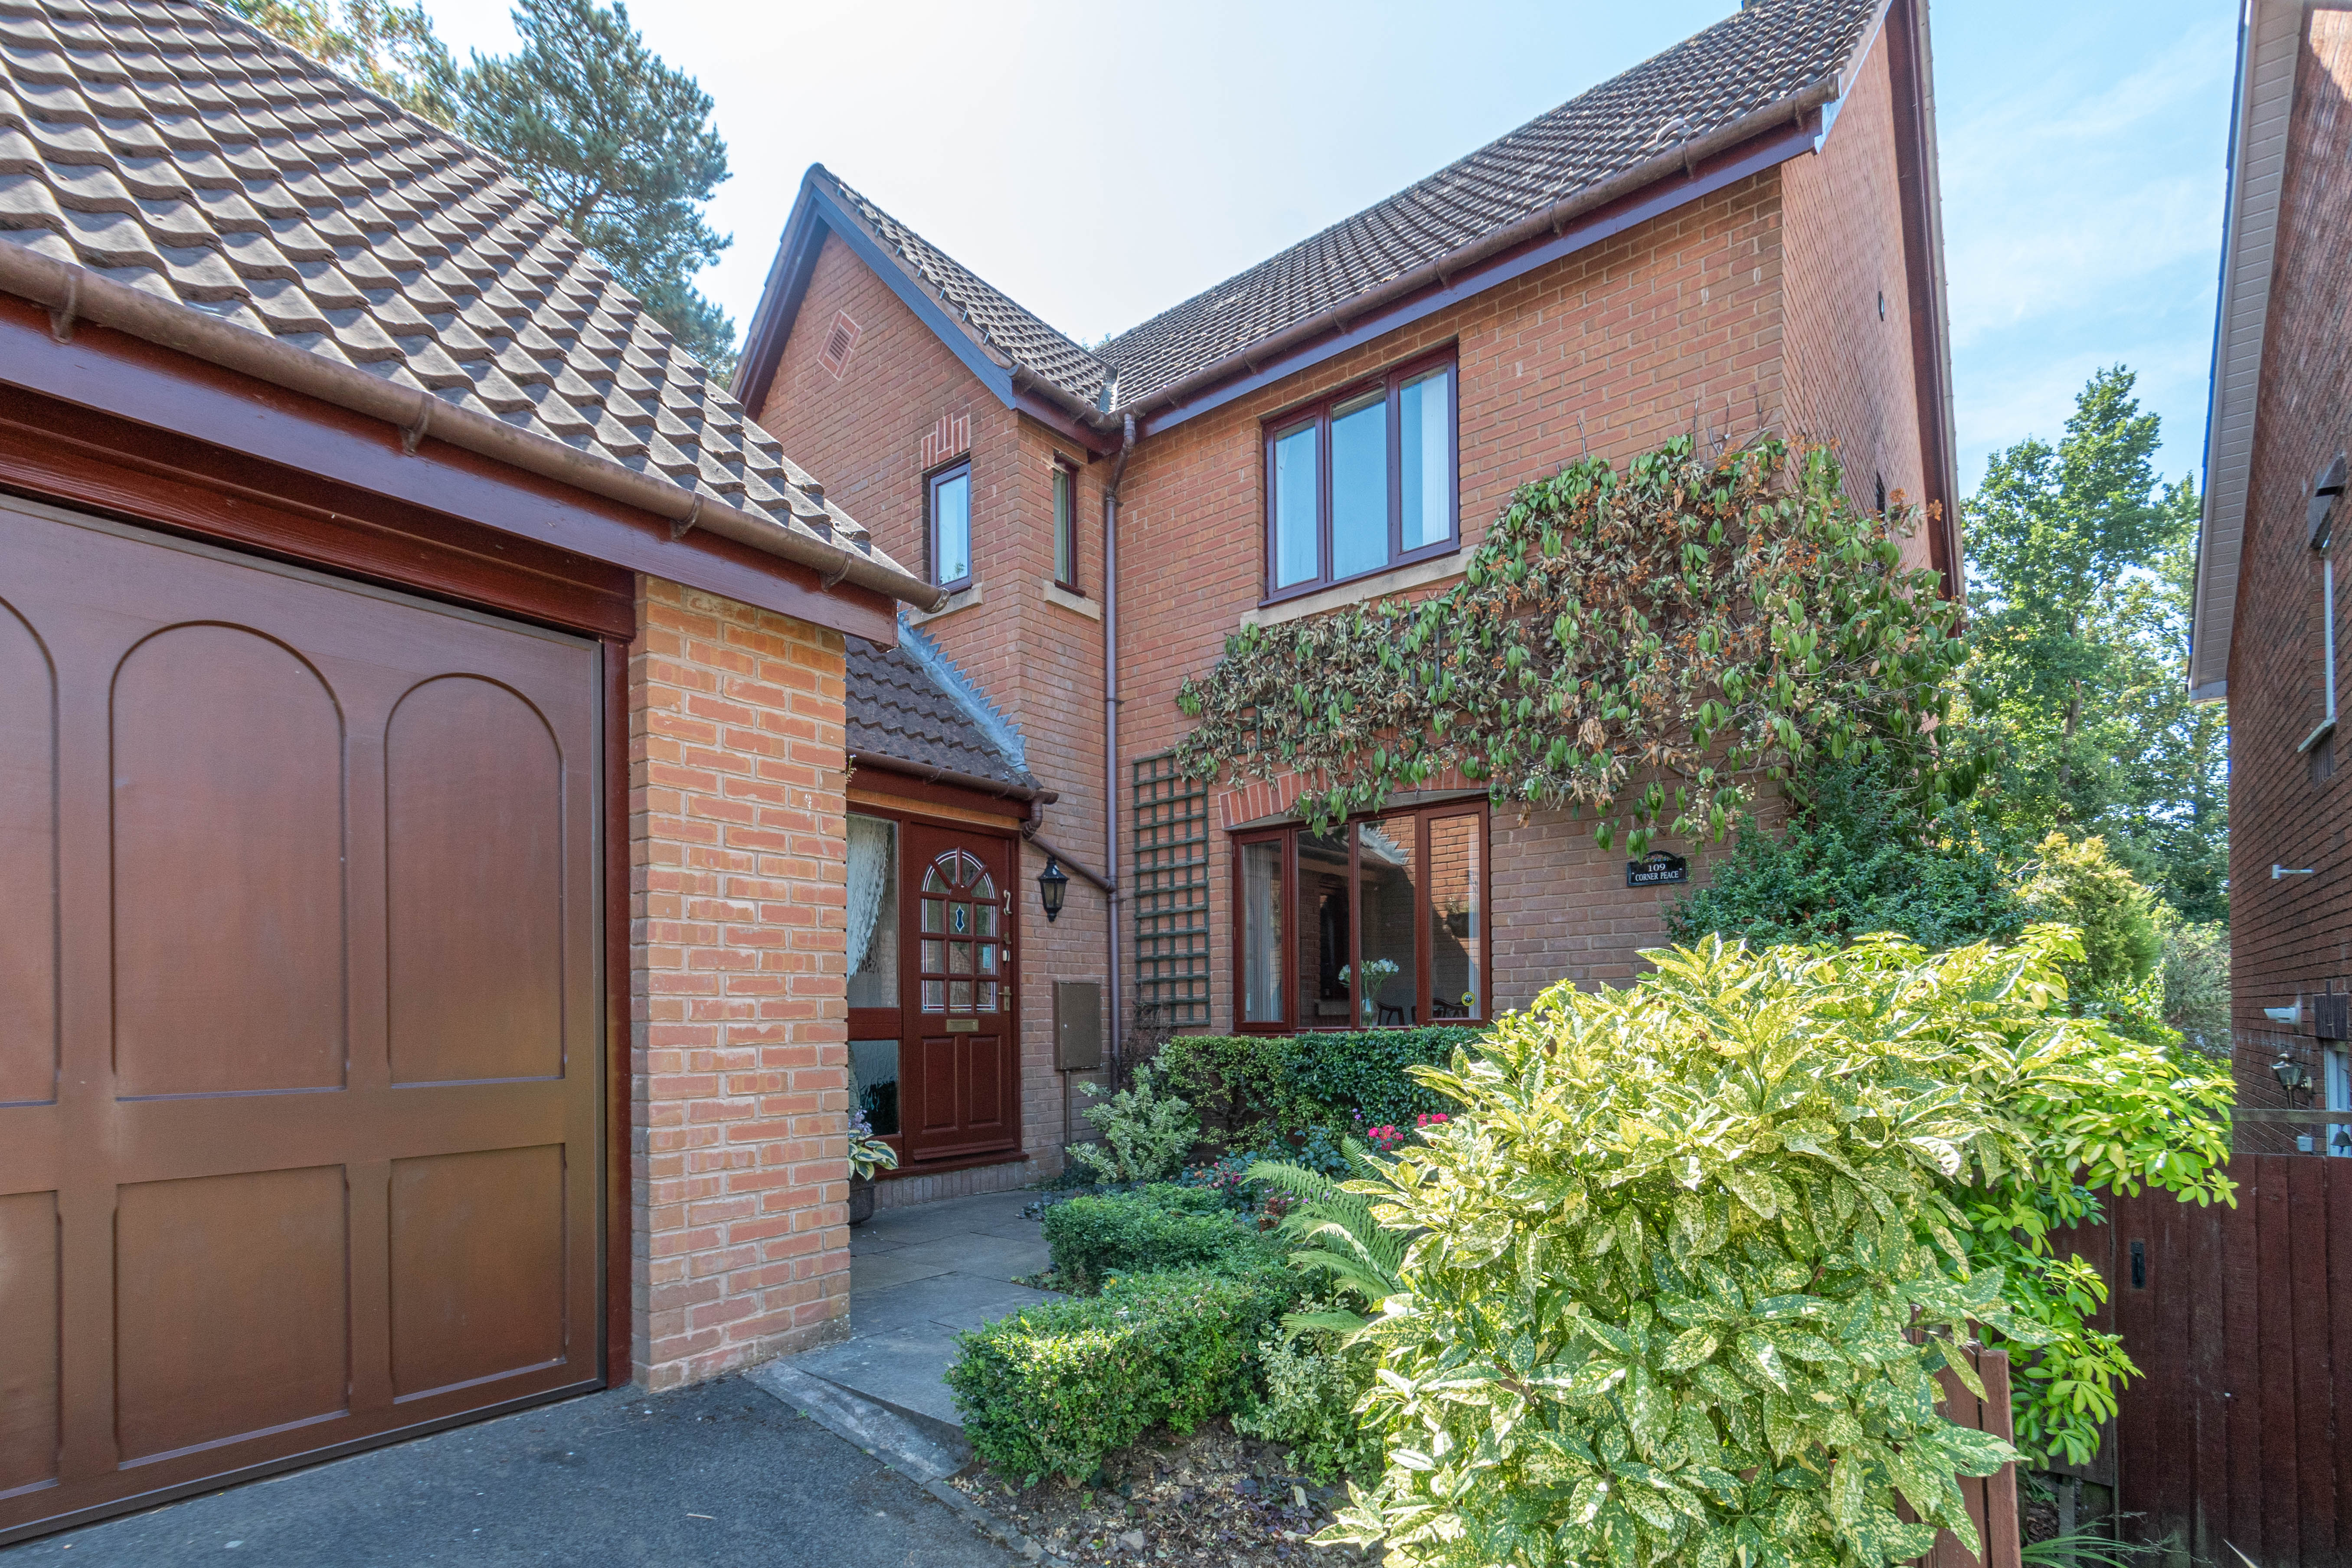 4 bed house for sale in Foxholes Lane, Callow Hill 23